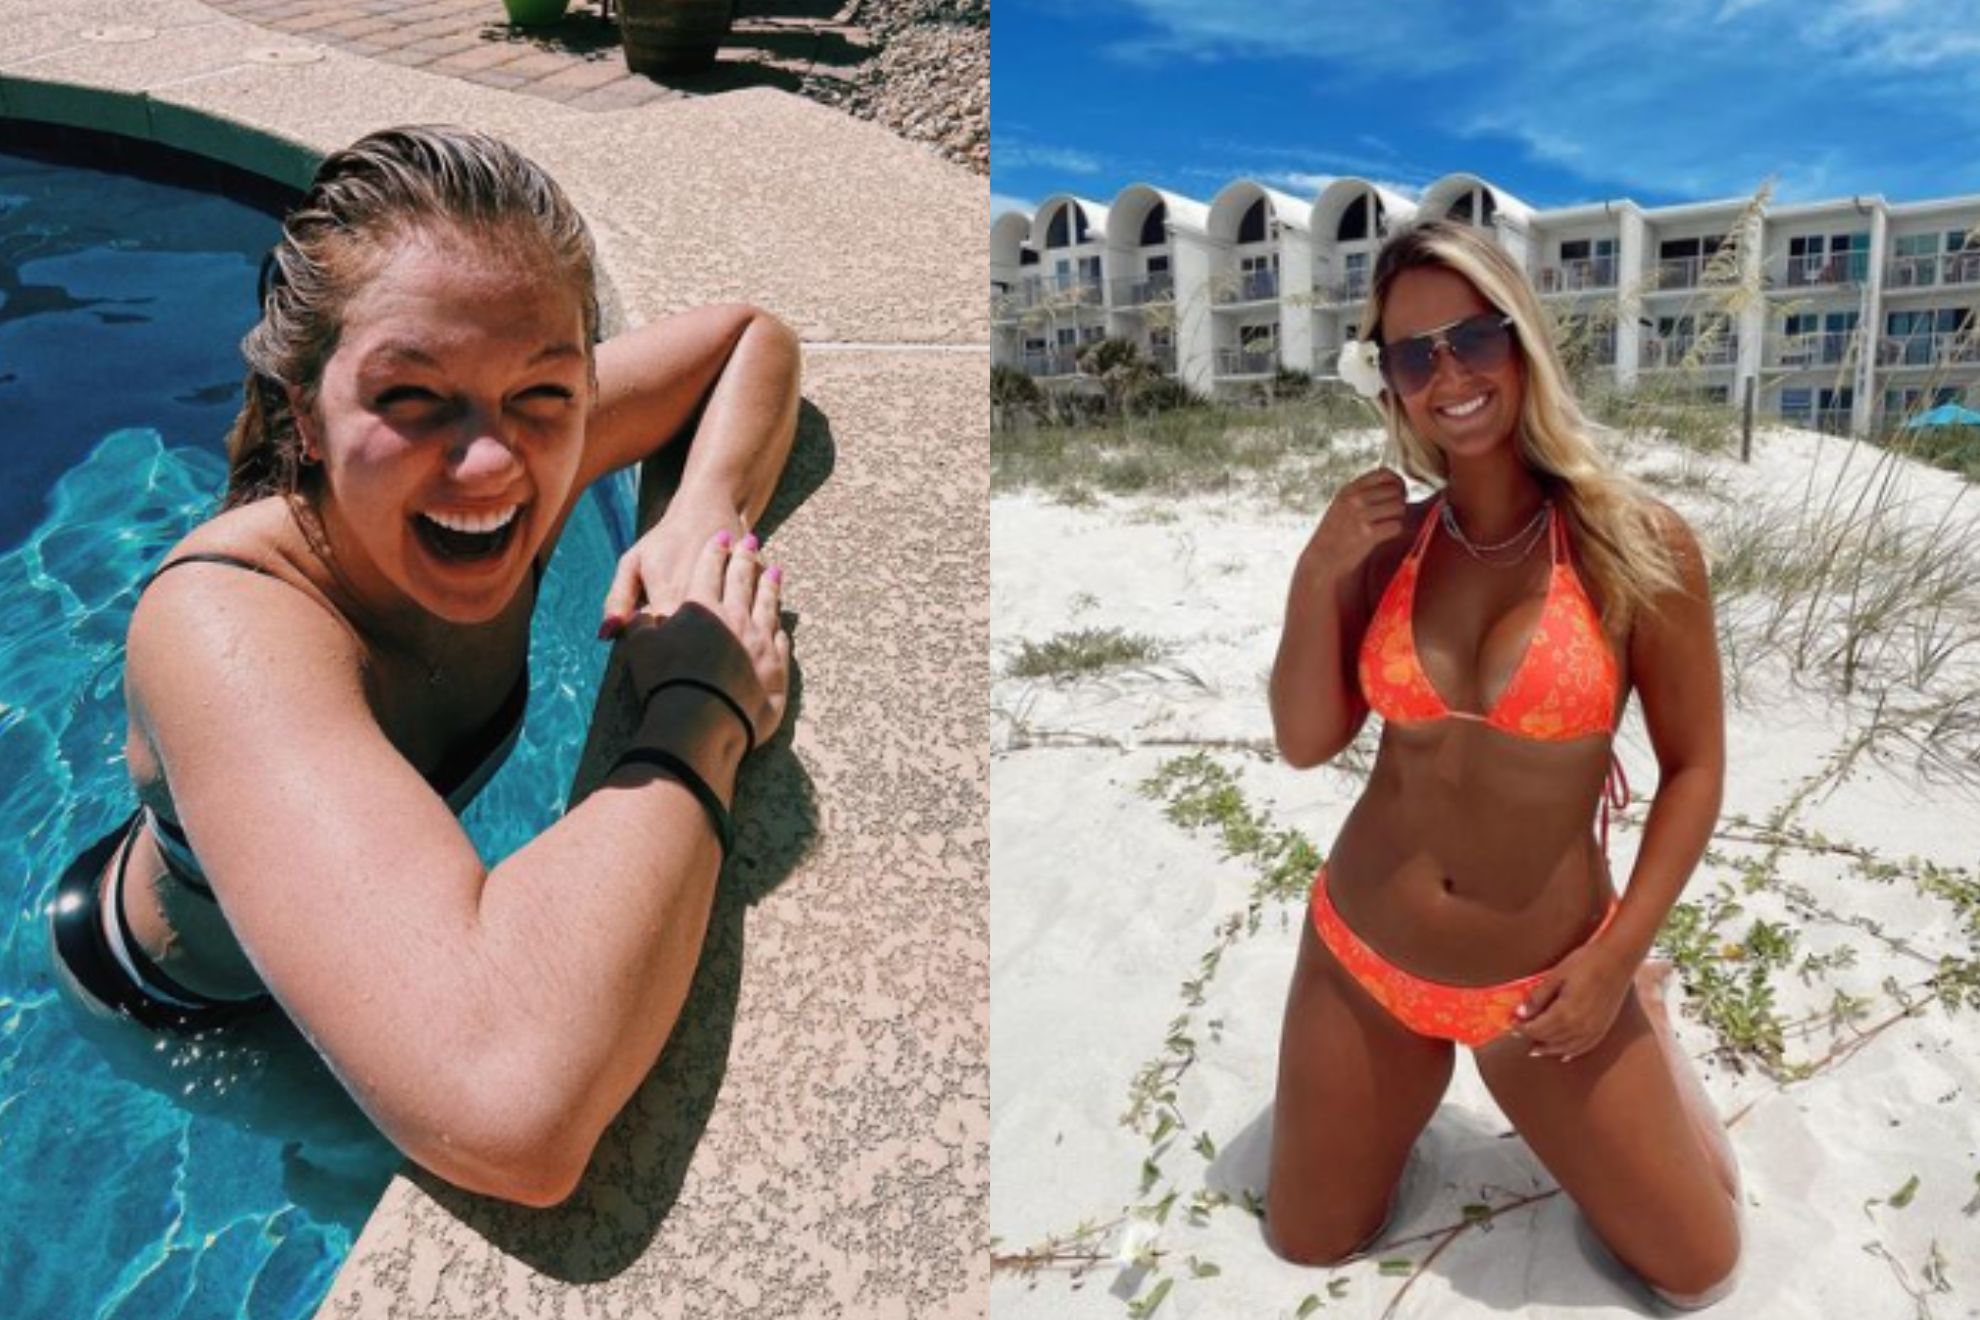 Jenna Brandt (left) and Whittney Purdy (right)